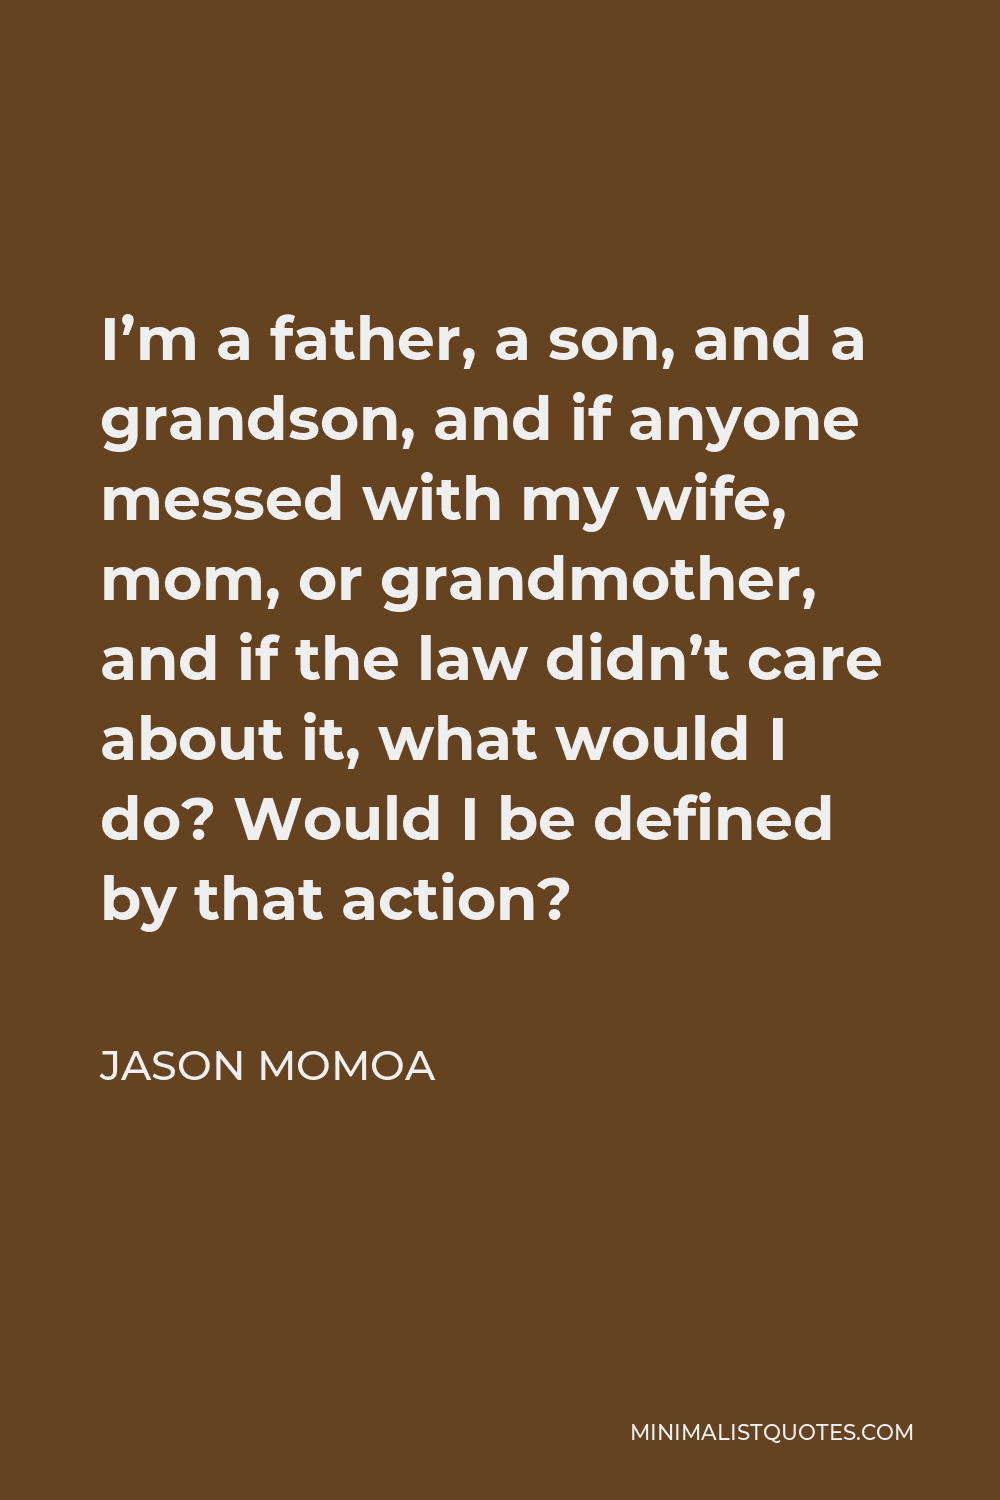 Jason Momoa Quote - I’m a father, a son, and a grandson, and if anyone messed with my wife, mom, or grandmother, and if the law didn’t care about it, what would I do? Would I be defined by that action?